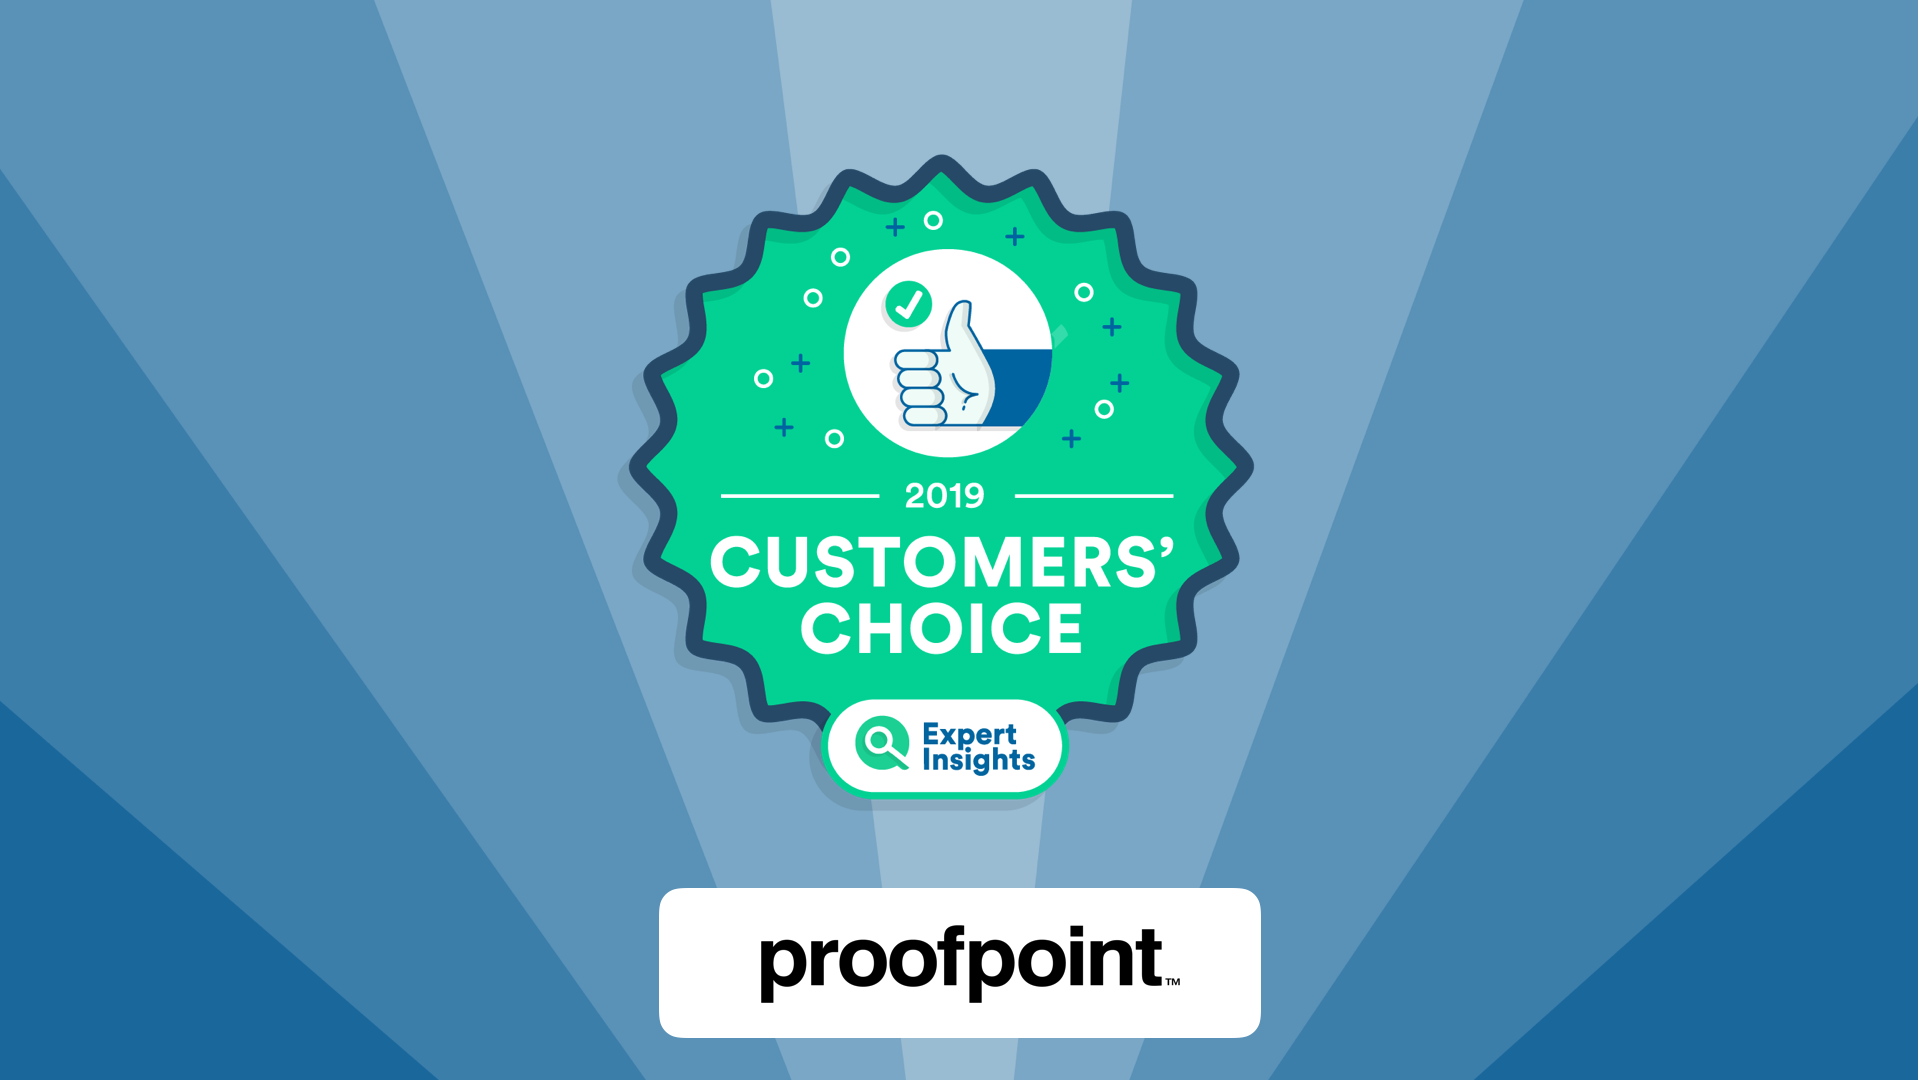 Proofpoint customers choice